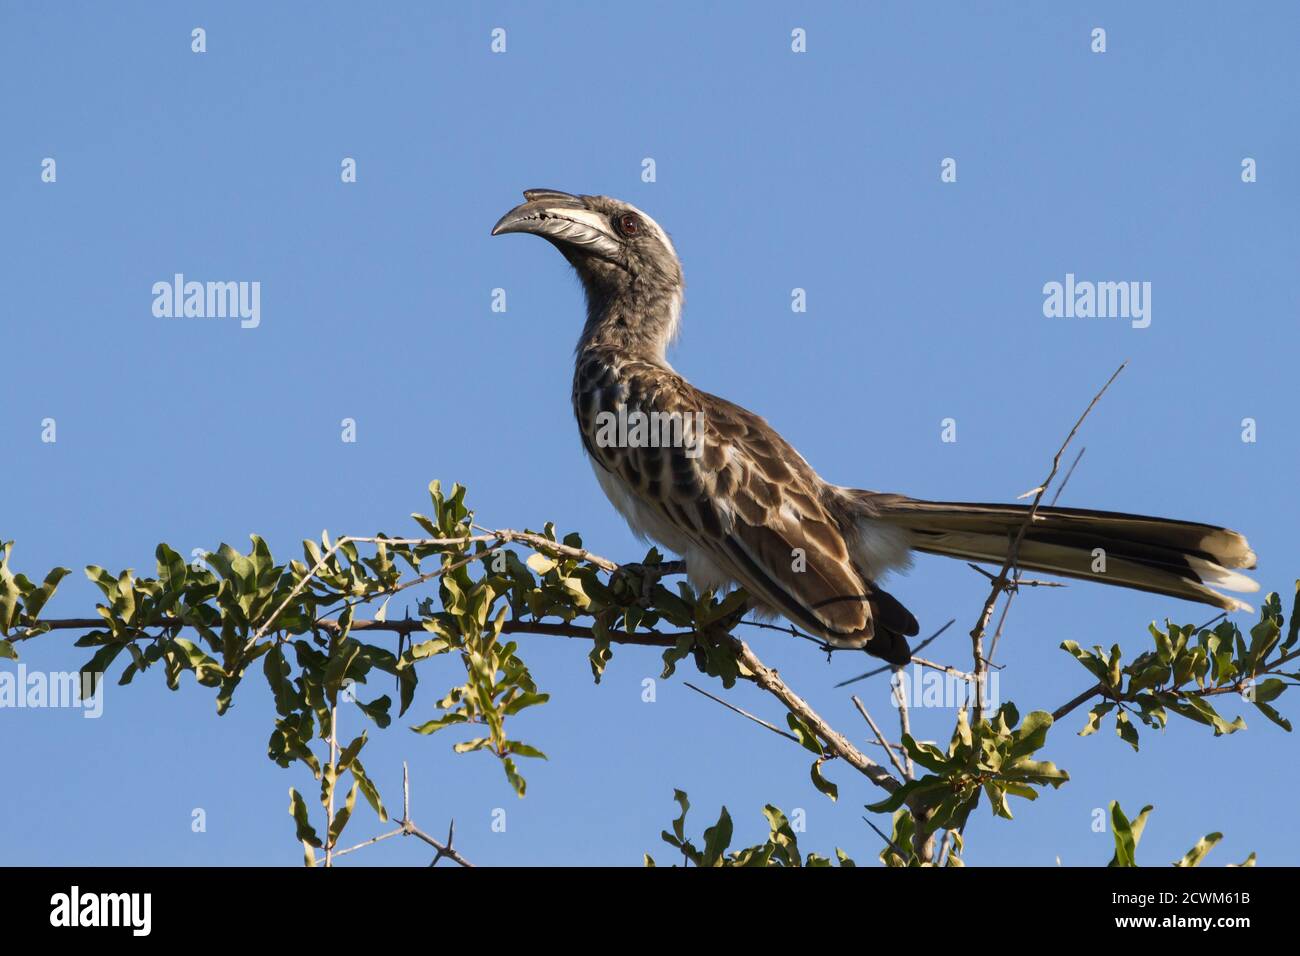 Male african grey hornbill (Lophoceros nasutus) perched on a tree branch against blue sky background in Kruger National Park, South Africa Stock Photo